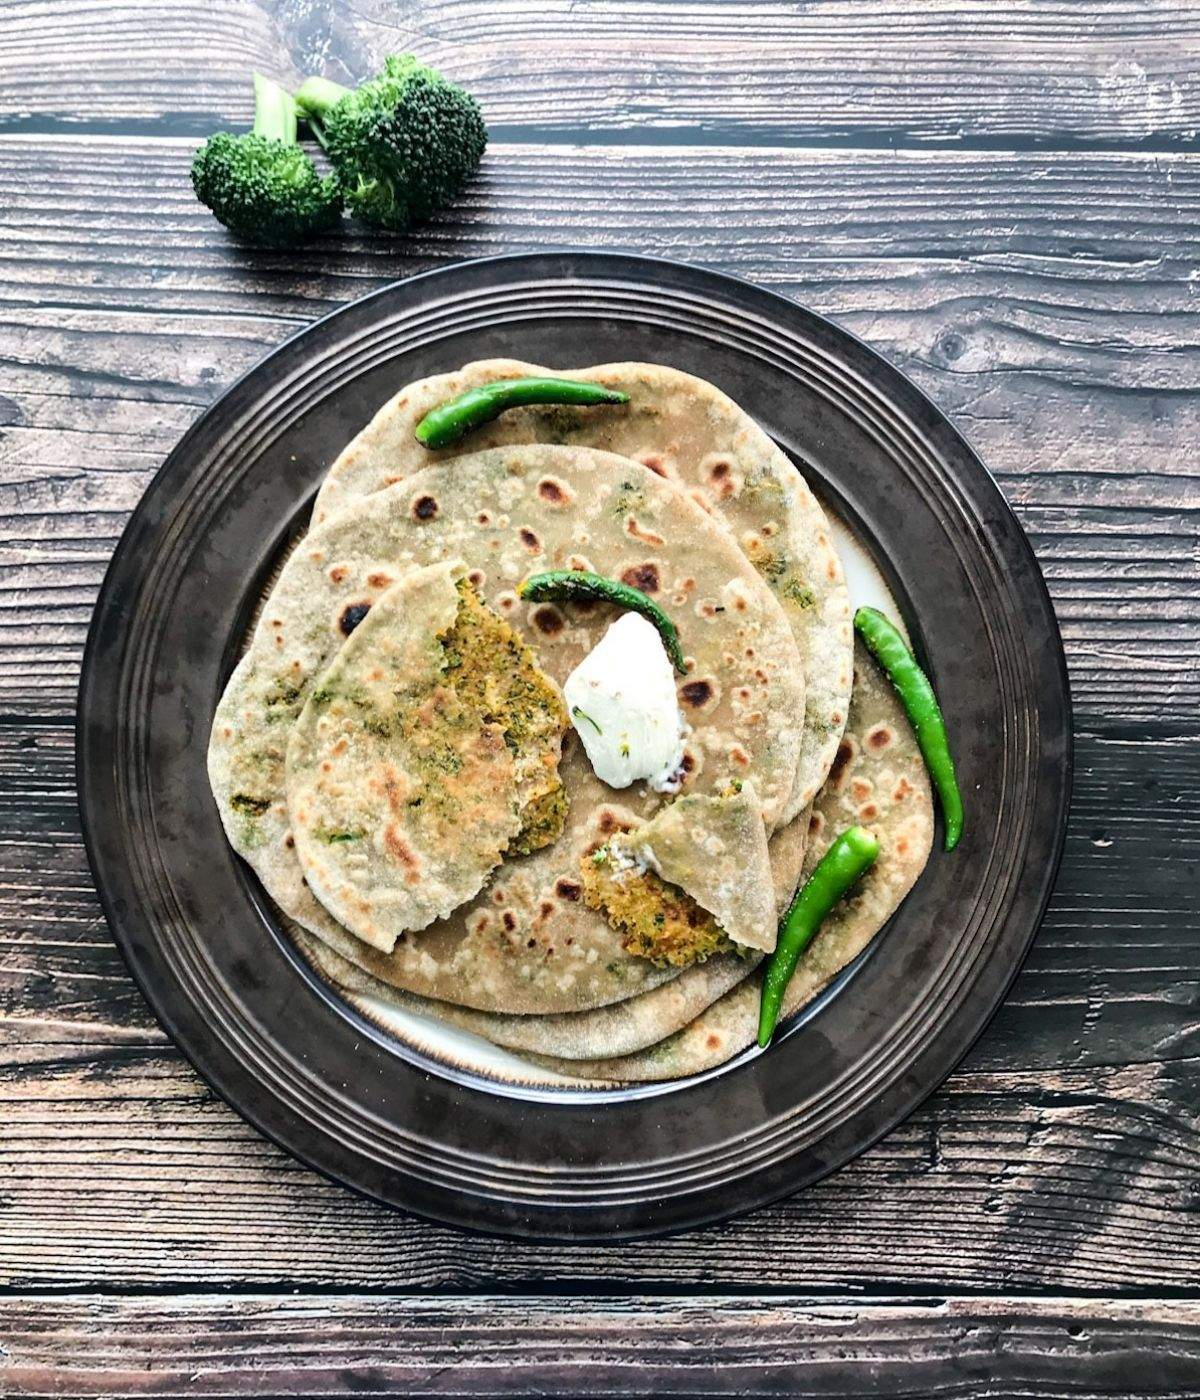 A plate of broccoli paratha os on the table and topped with vegan butter and green chilies